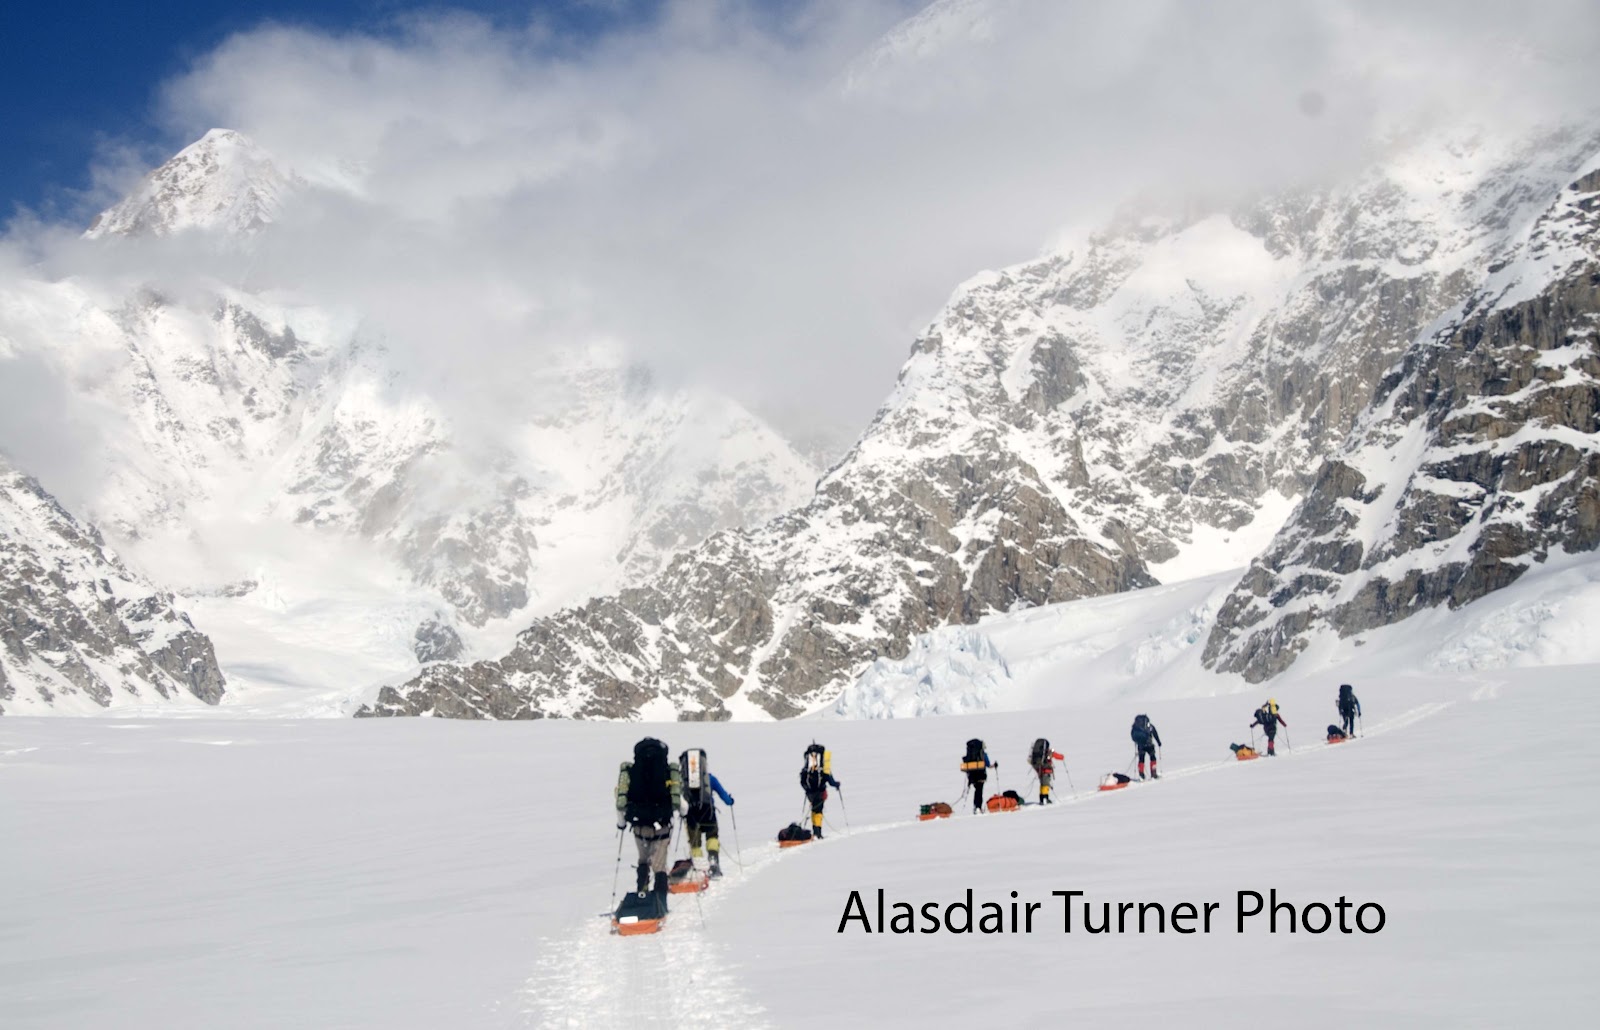 Essay on mountaineering expedition